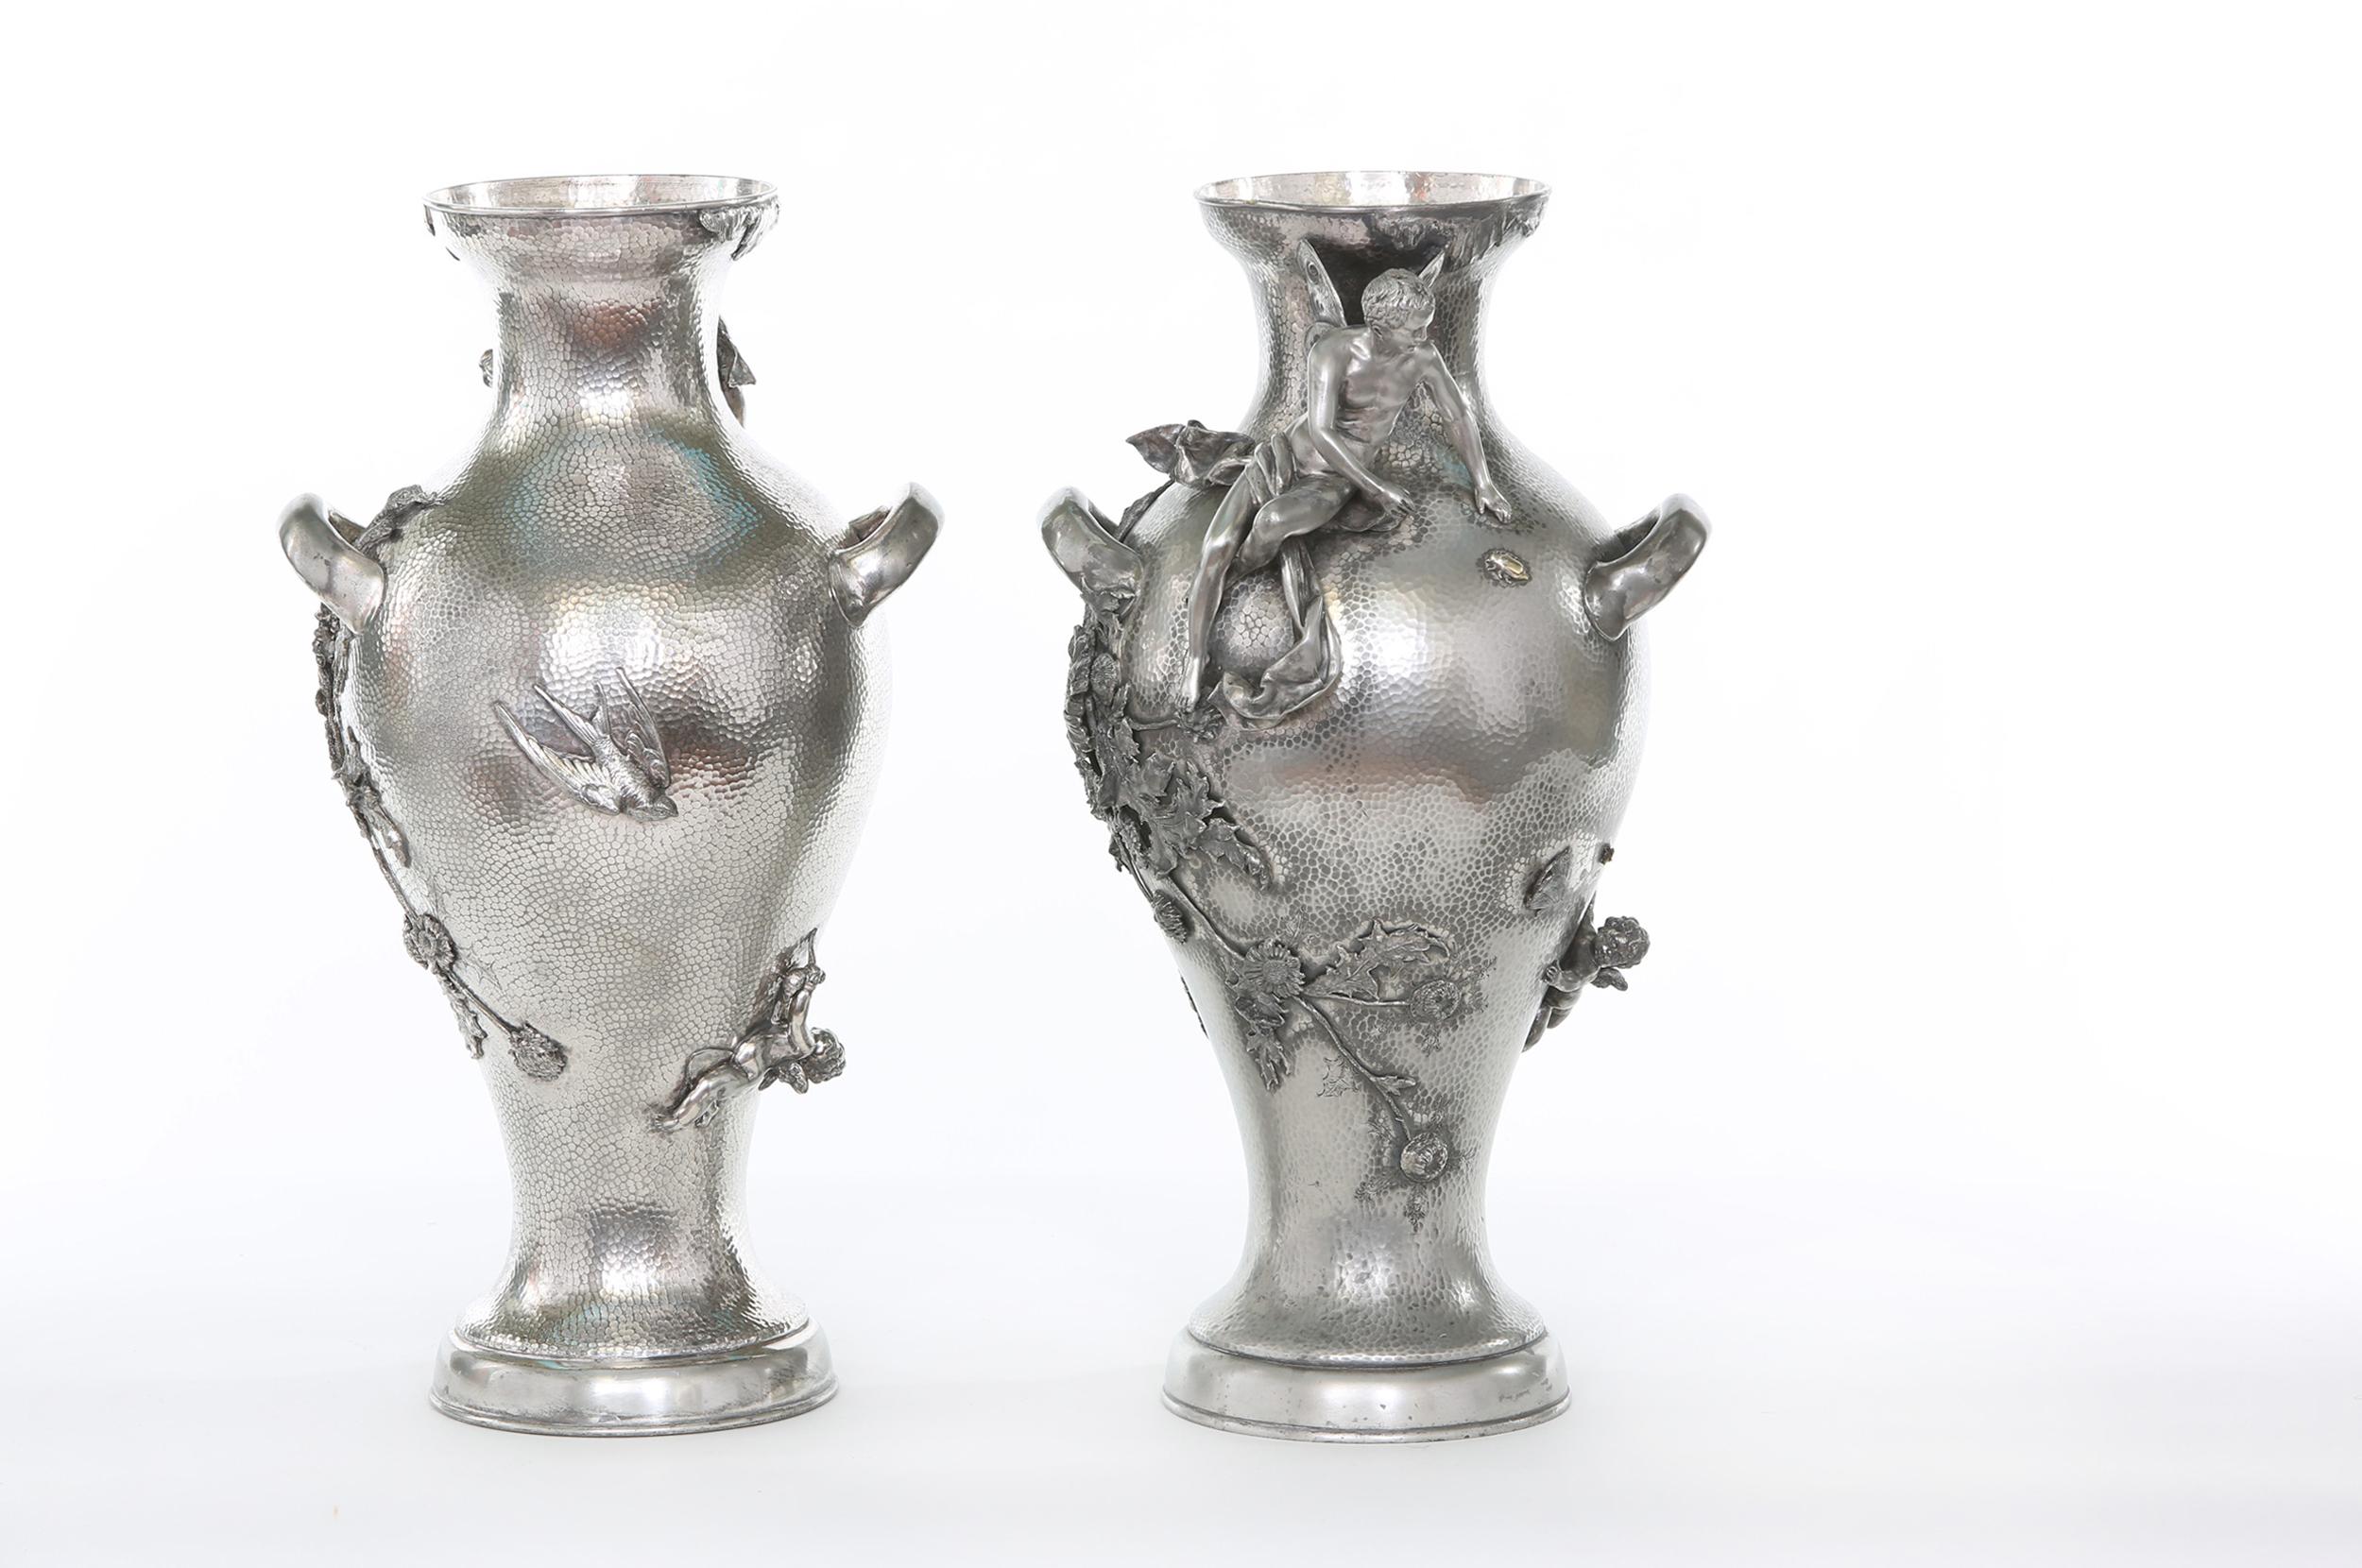 Late 19th century silver plated pair of handcrafted decorative vases / urns with exterior design details and removable water holder receptacle. Each vase / piece is in great condition. Minor wear consistent with age / use. Each vase stands about 20